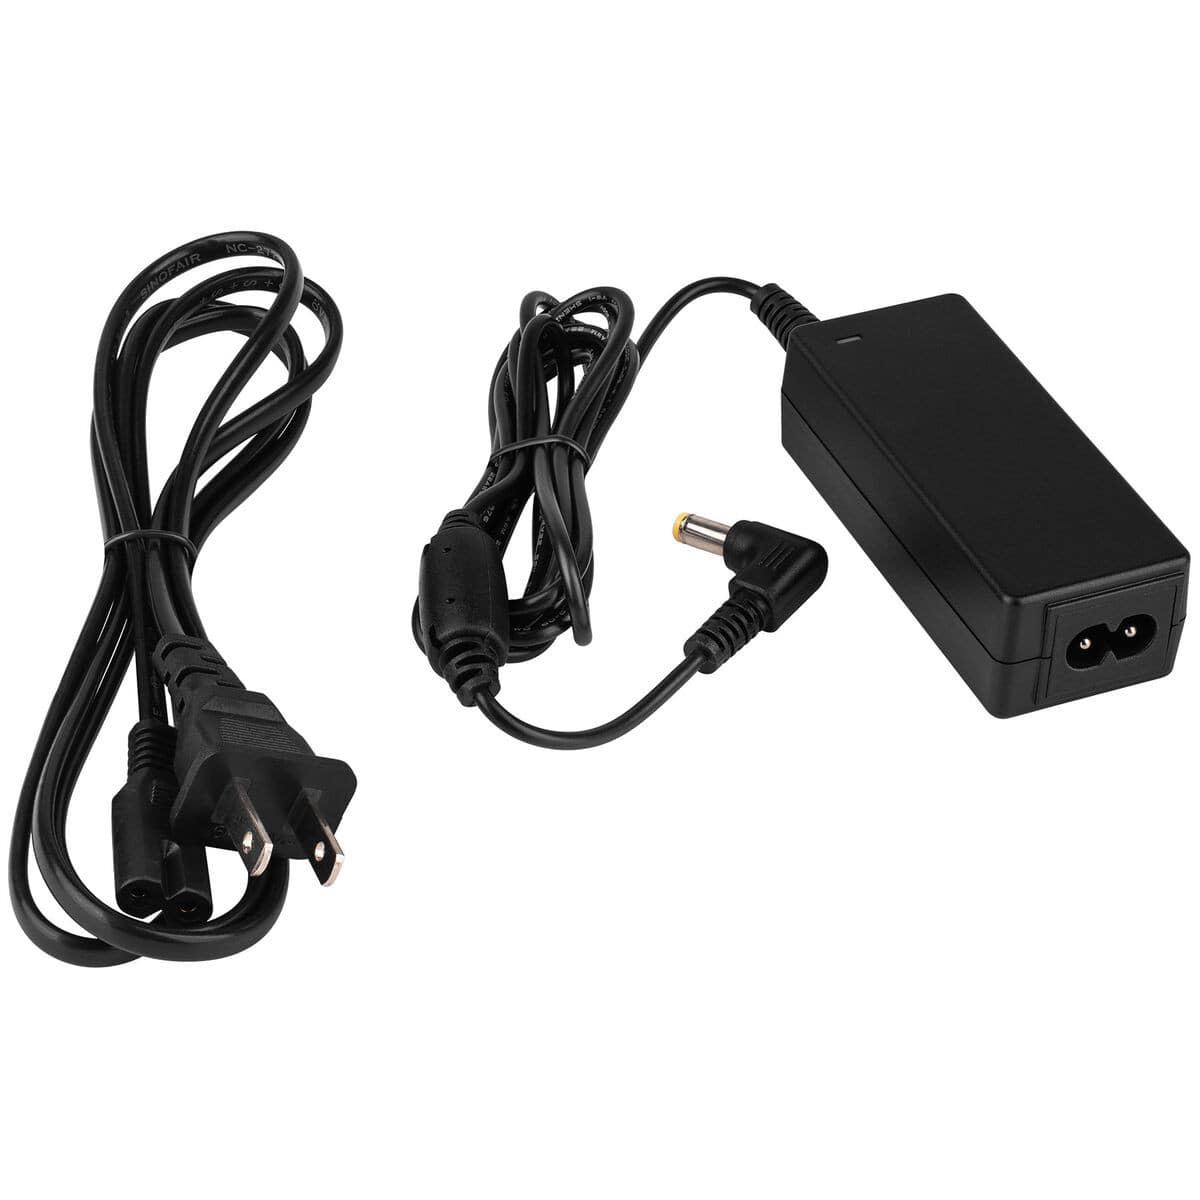 Huntkey 19V 2.1A Laptop Charger with Power Cord Brands  |  Huntkey  |